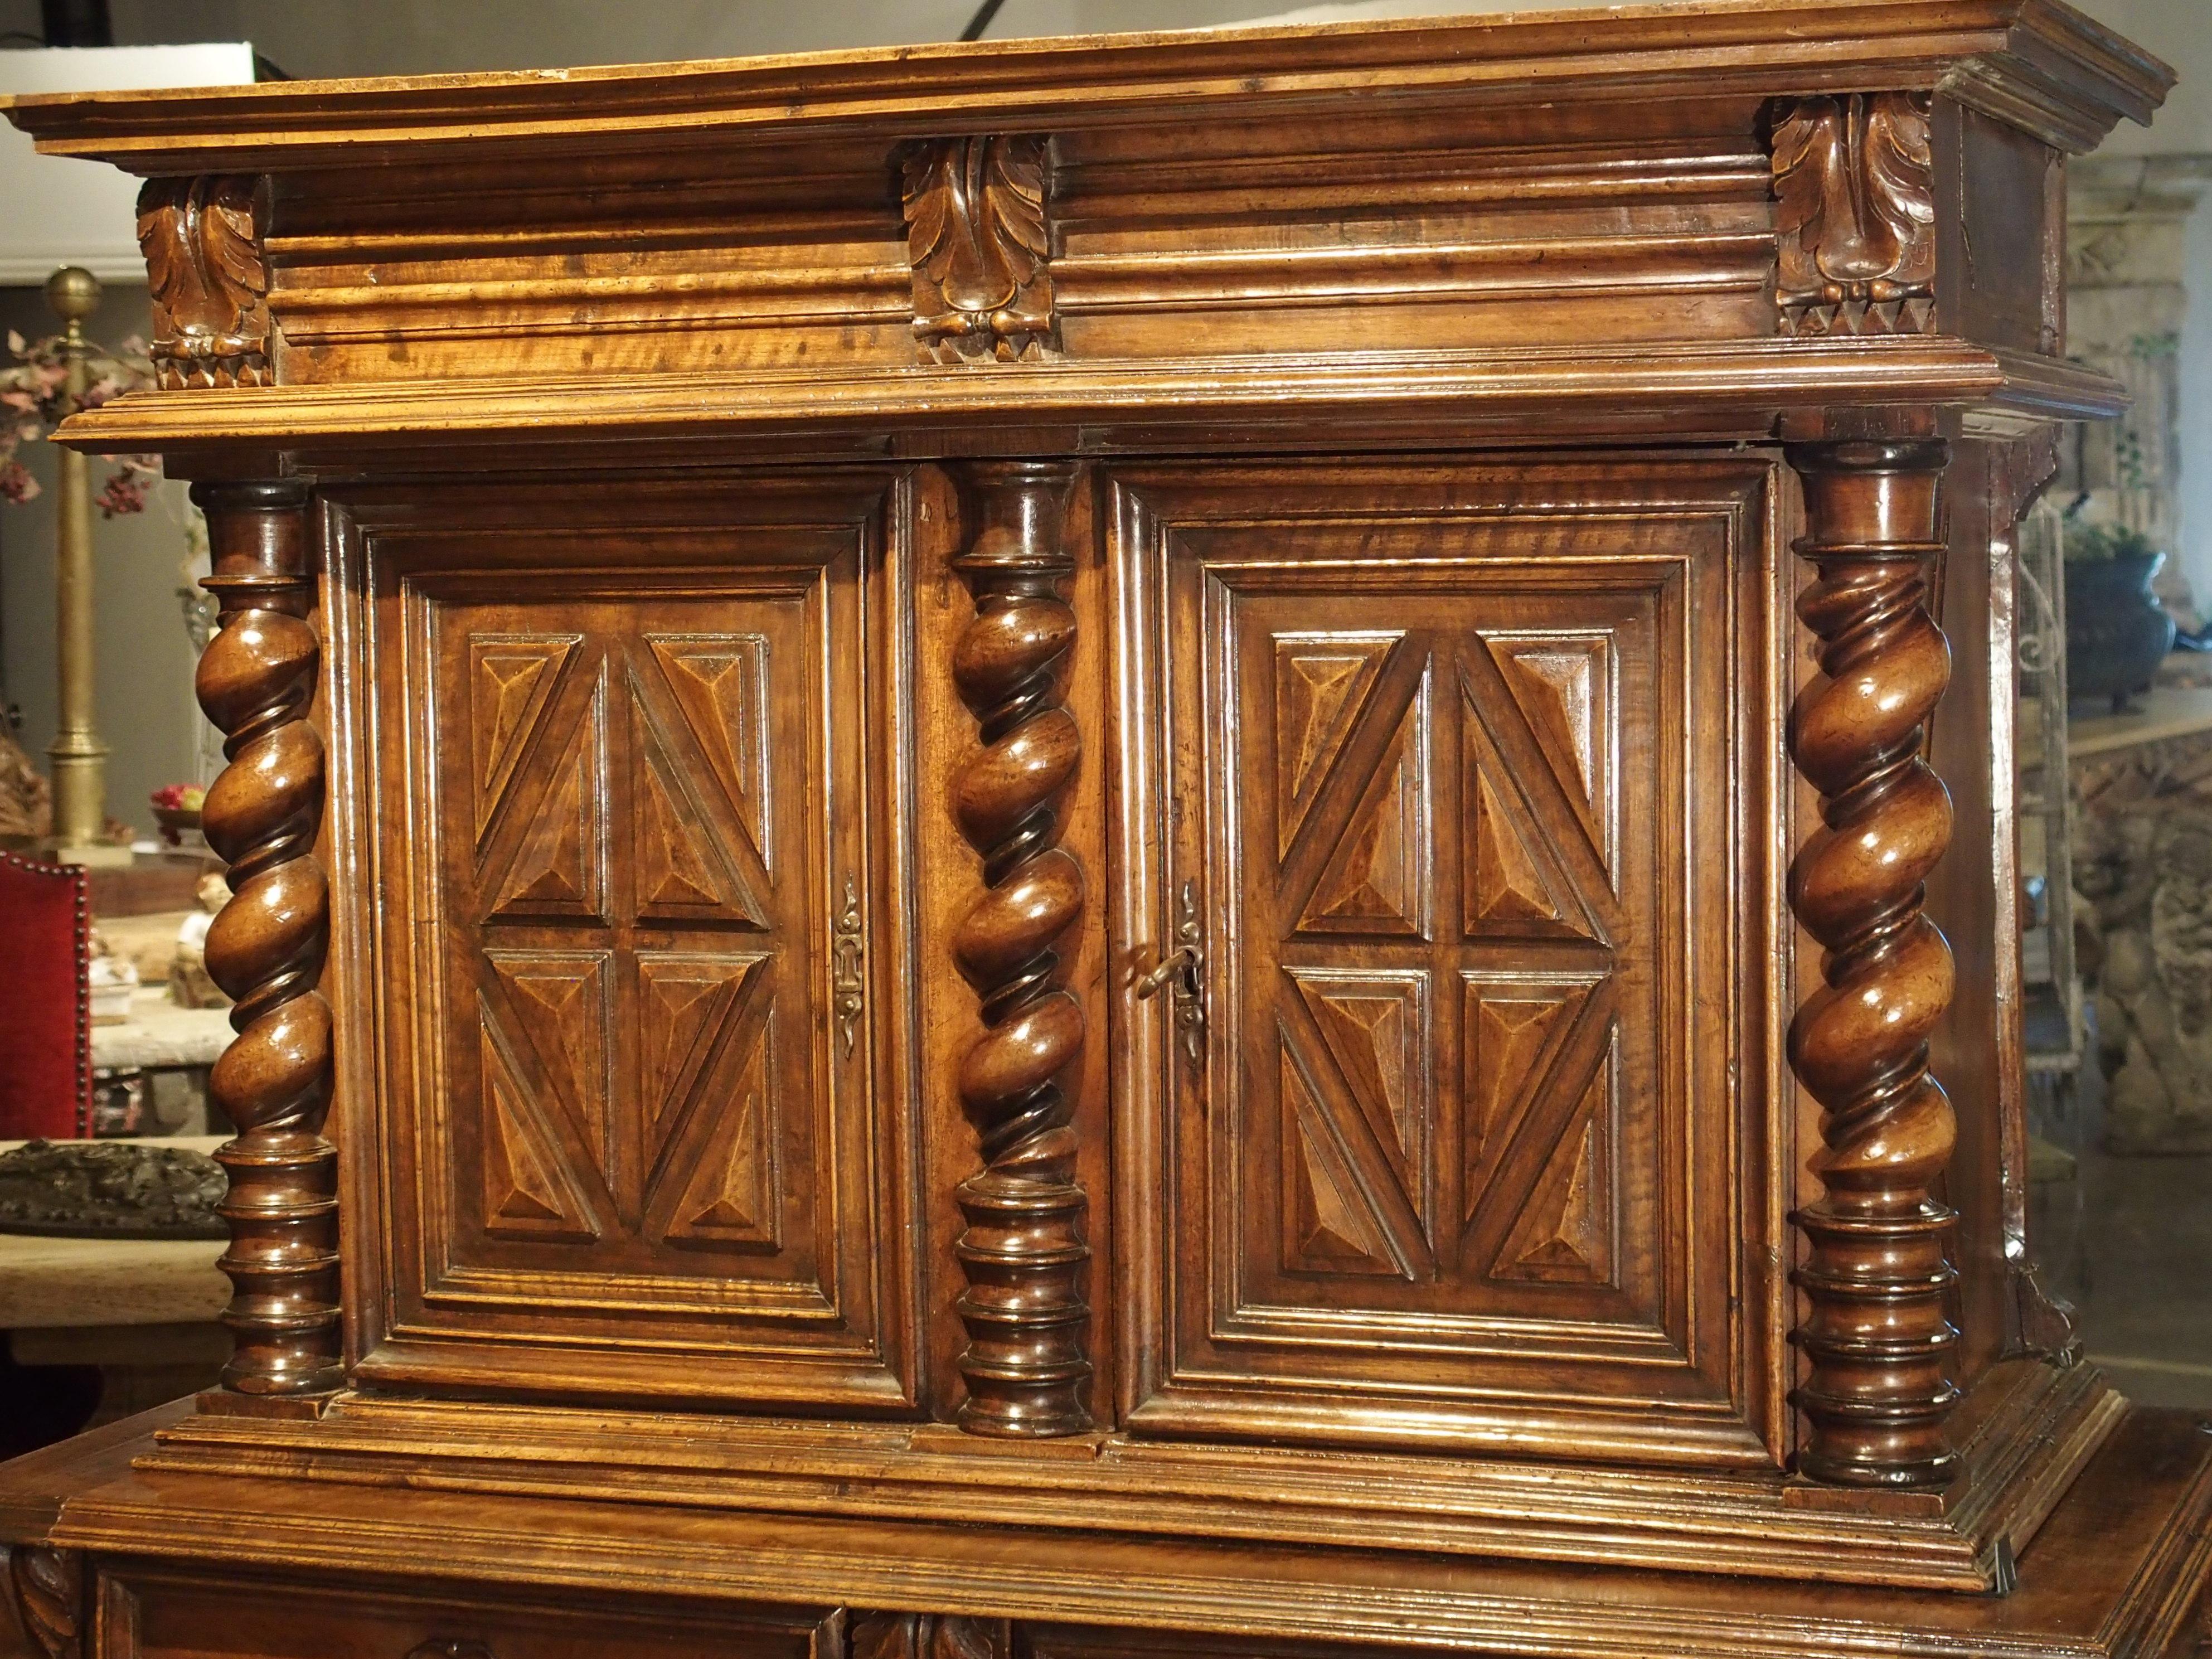 Hand-Carved Antique Walnut Wood Buffet Deux Corps from Southwestern France, circa 1690